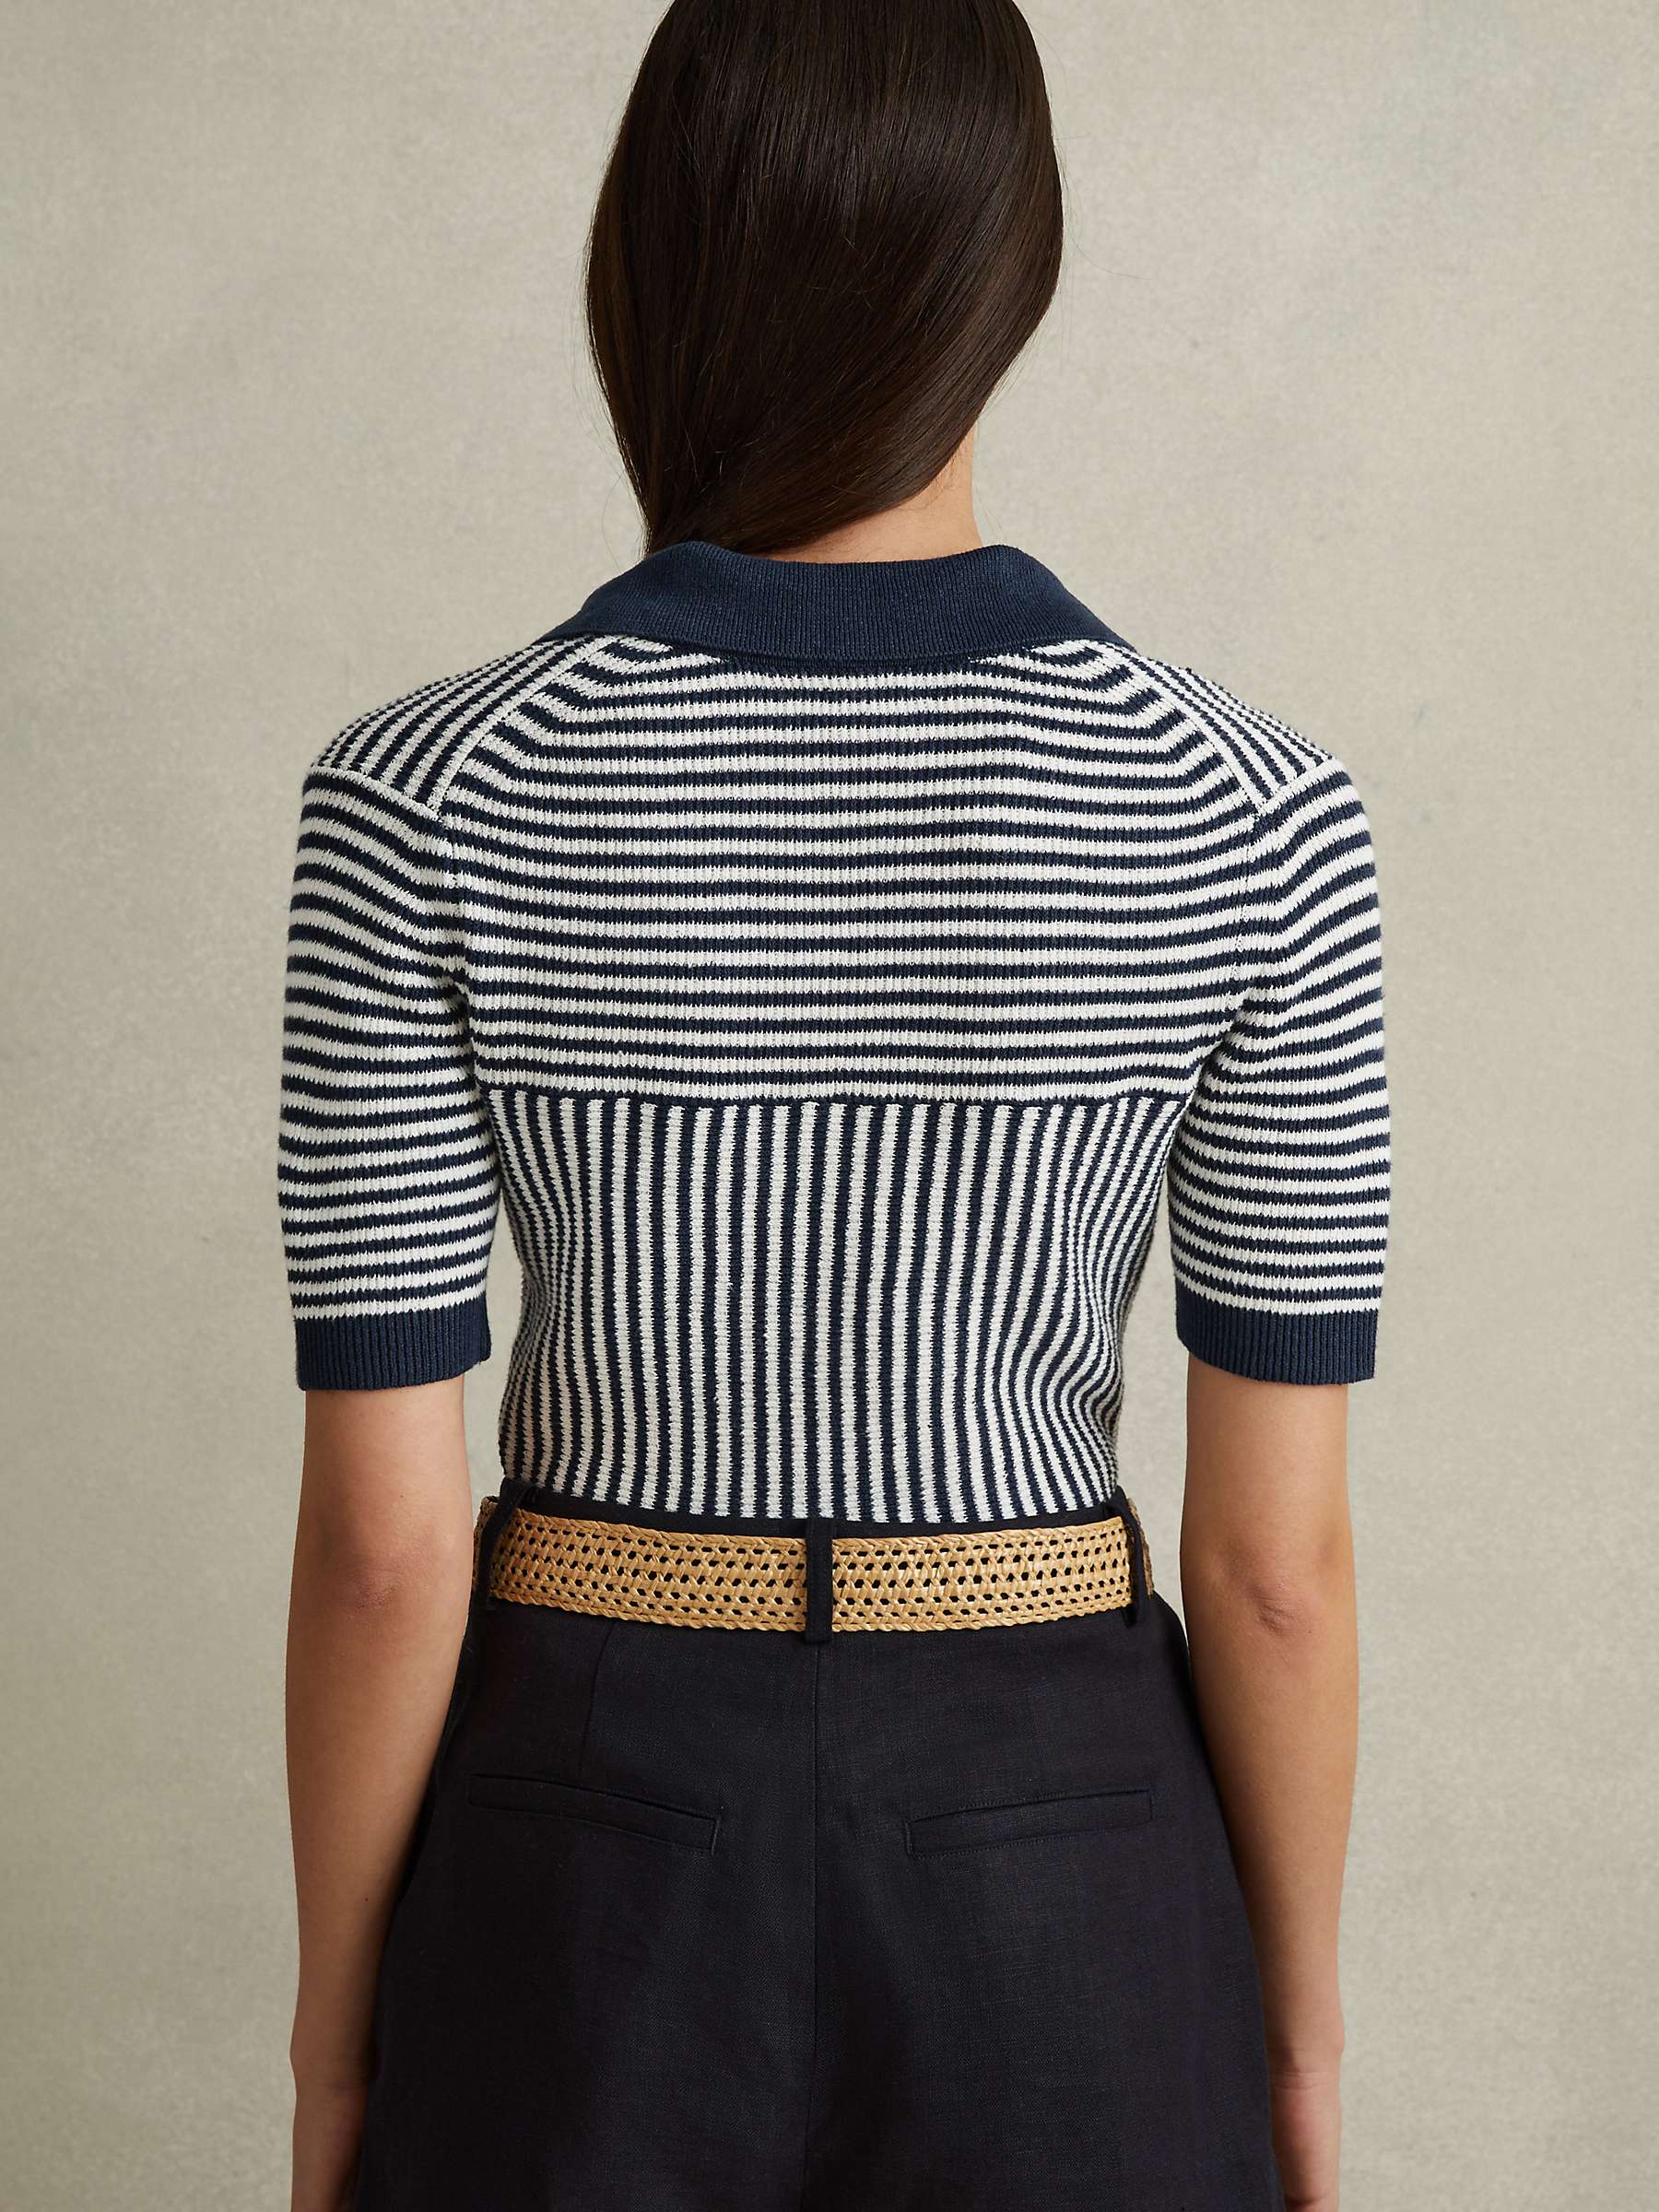 Buy Reiss Stevie Linen Blend Striped Polo Top, Navy/Ivory Online at johnlewis.com